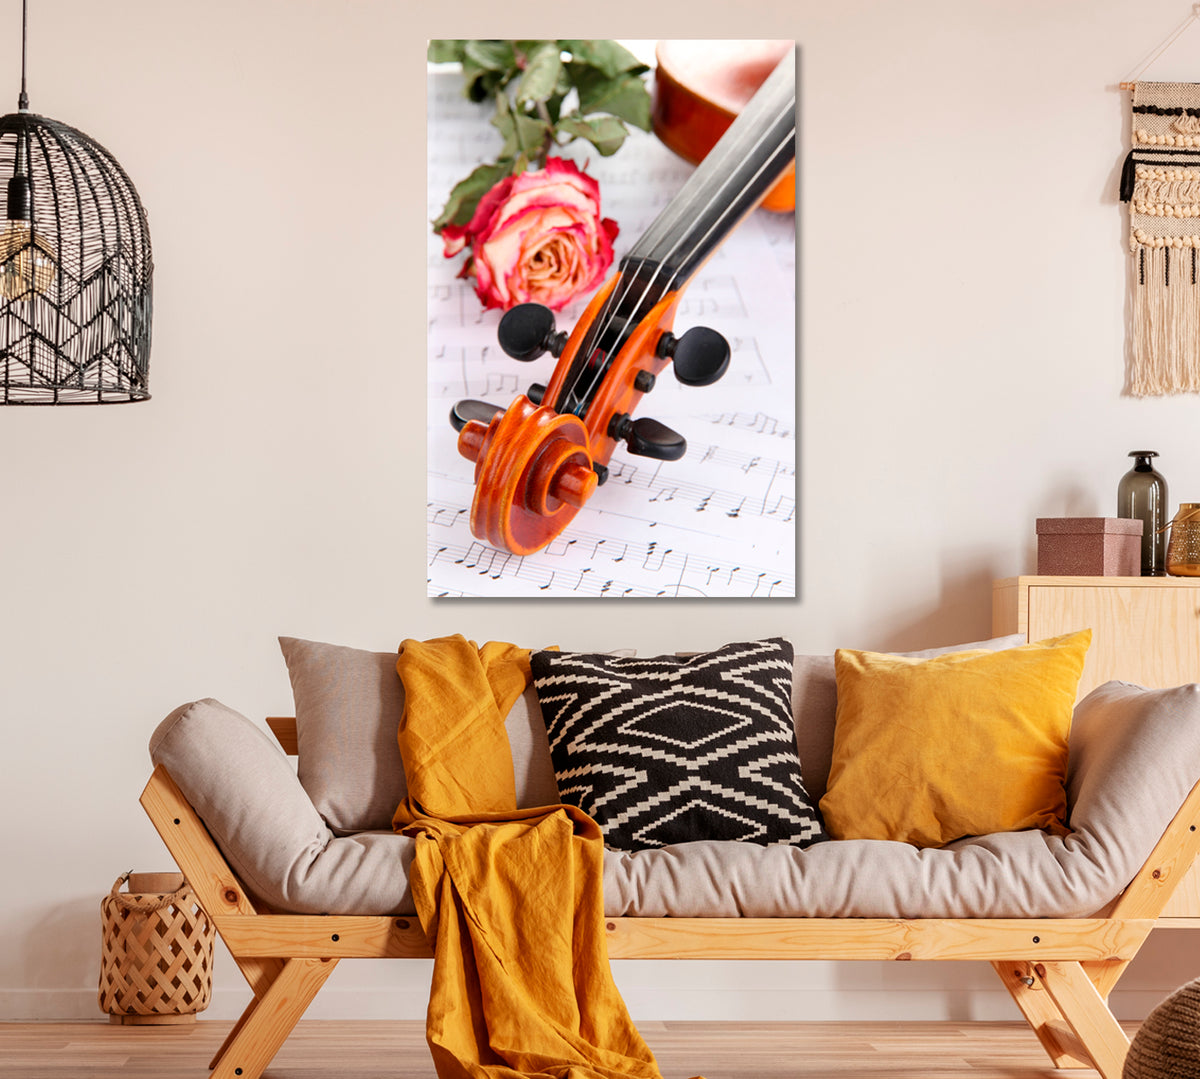 Violin with Dry Rose on Notes Canvas Print ArtLexy 1 Panel 16"x24" inches 